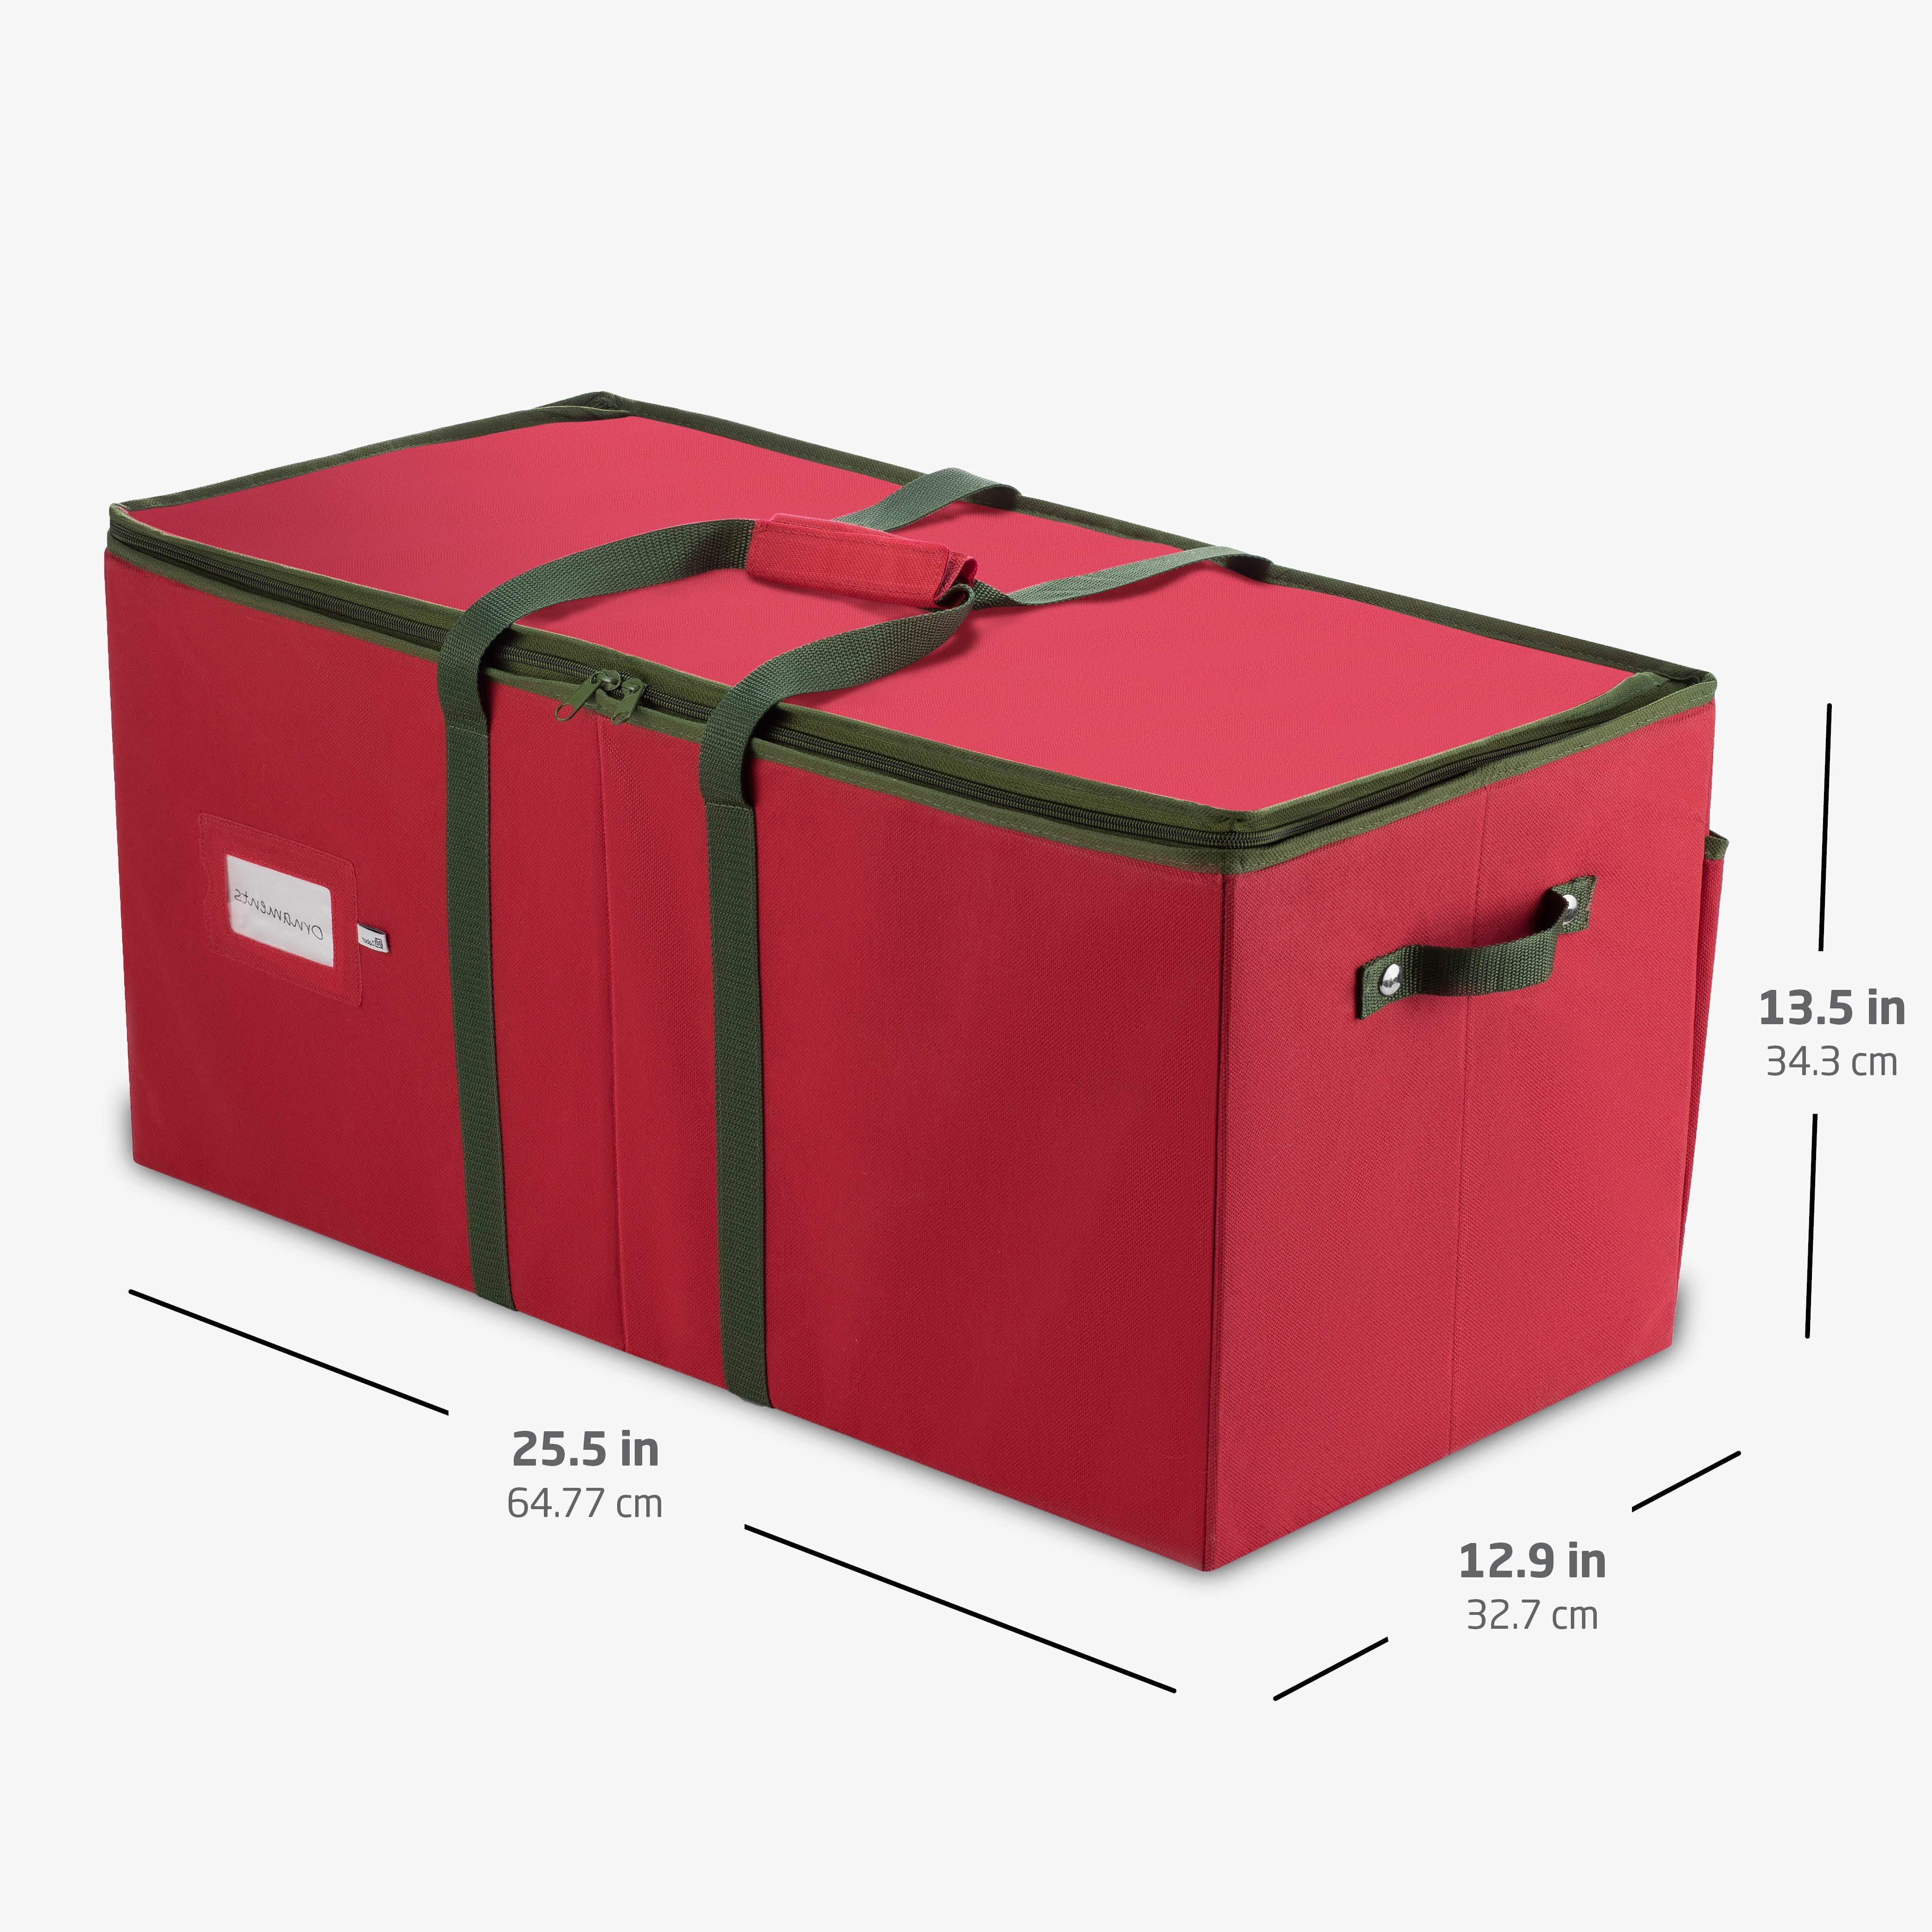  ZOBER Large Christmas Ornament Storage Box - Stores 128  Ornaments W/Dividers - Non-Woven, Durable Christmas Storage Containers -  Dual Zipper - Red : Home & Kitchen